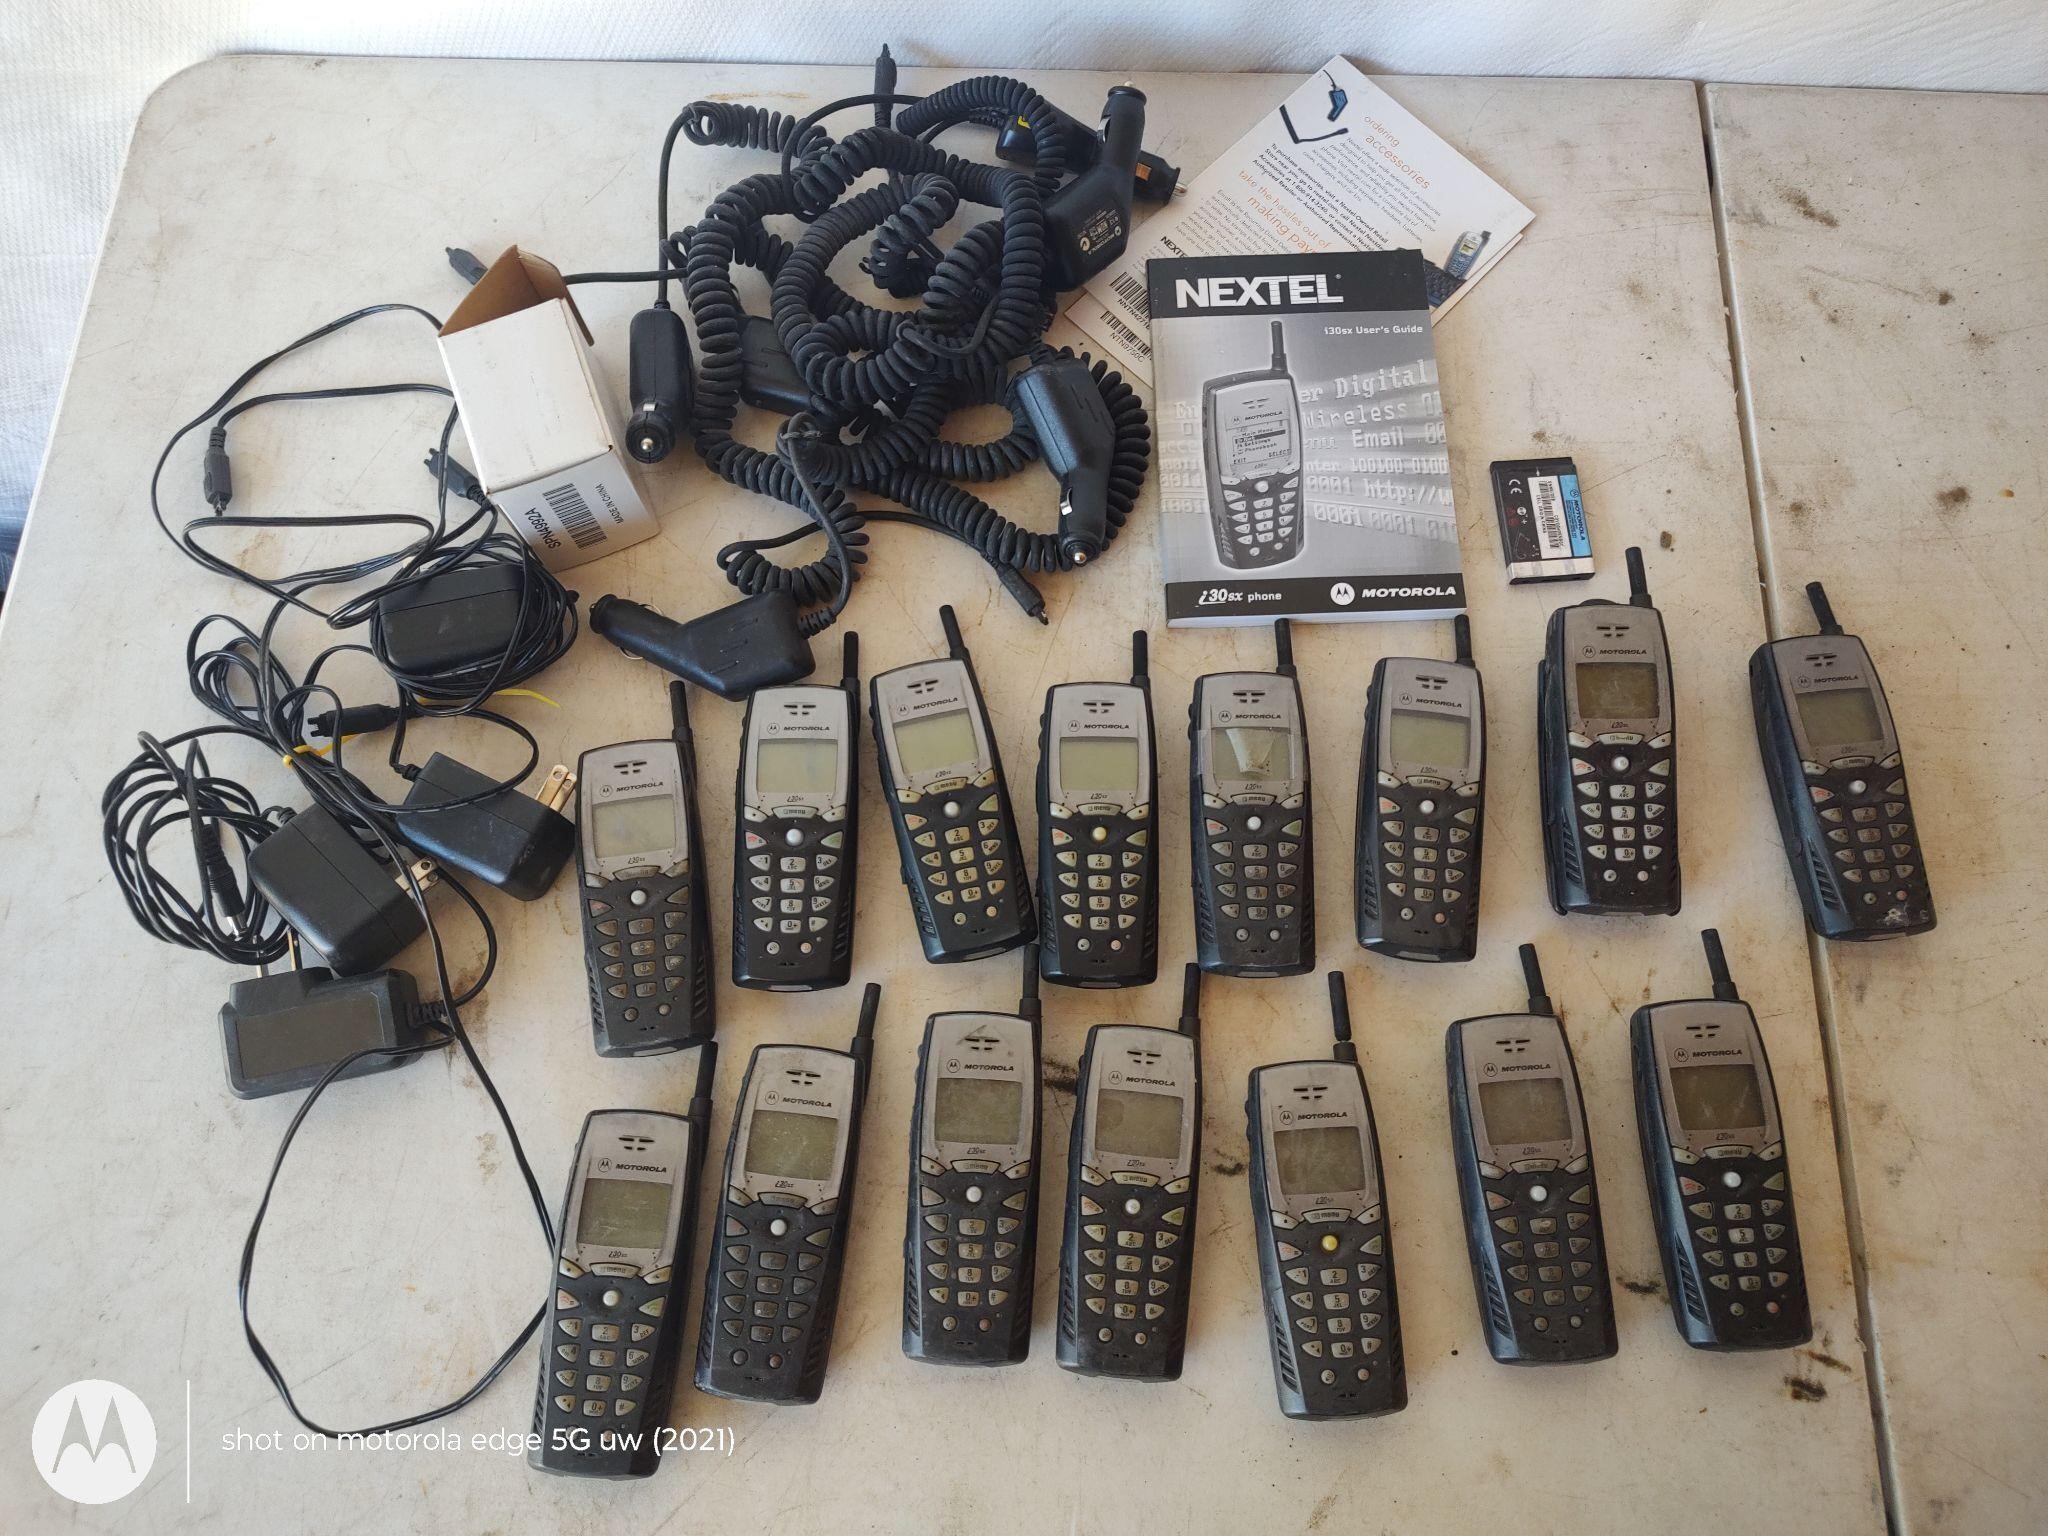 Motorola i30sx phones and chargers